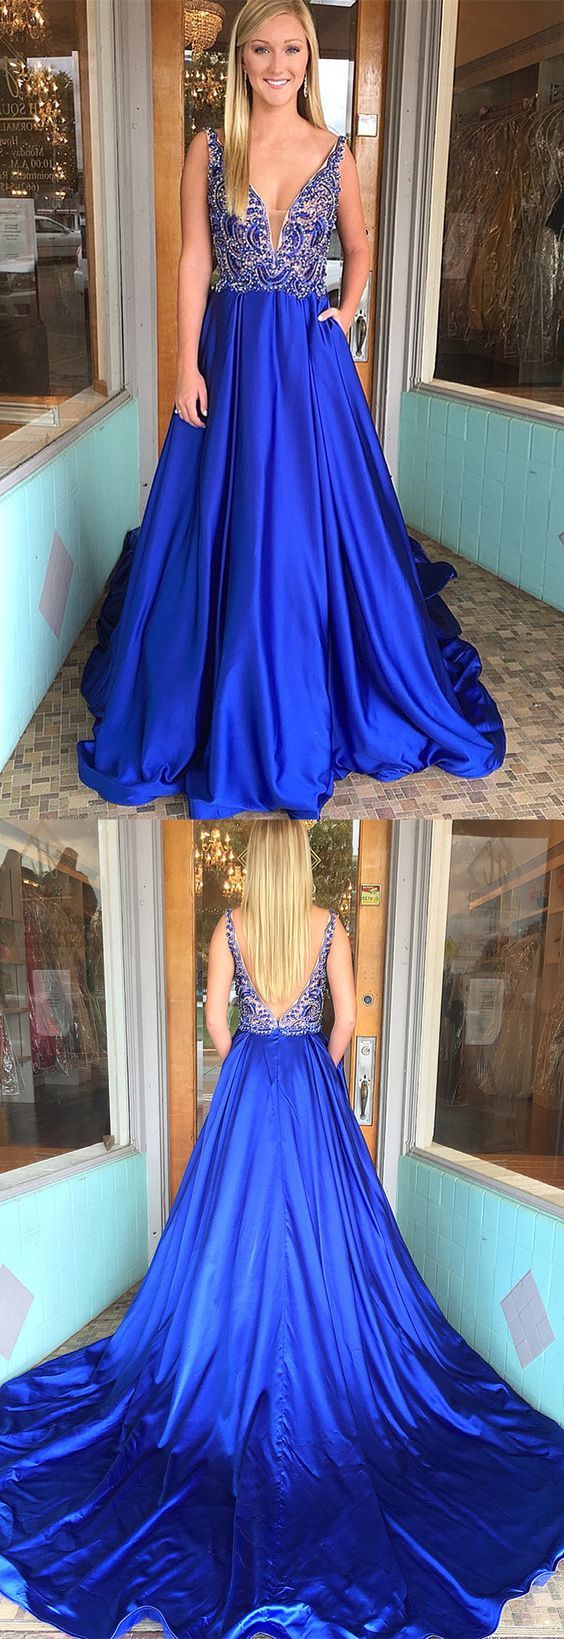 Royal Blue Prom Dress, Evening Dress, Pageant Dance Dresses, Graduation School Party Gown, PC0007 - Promcoming